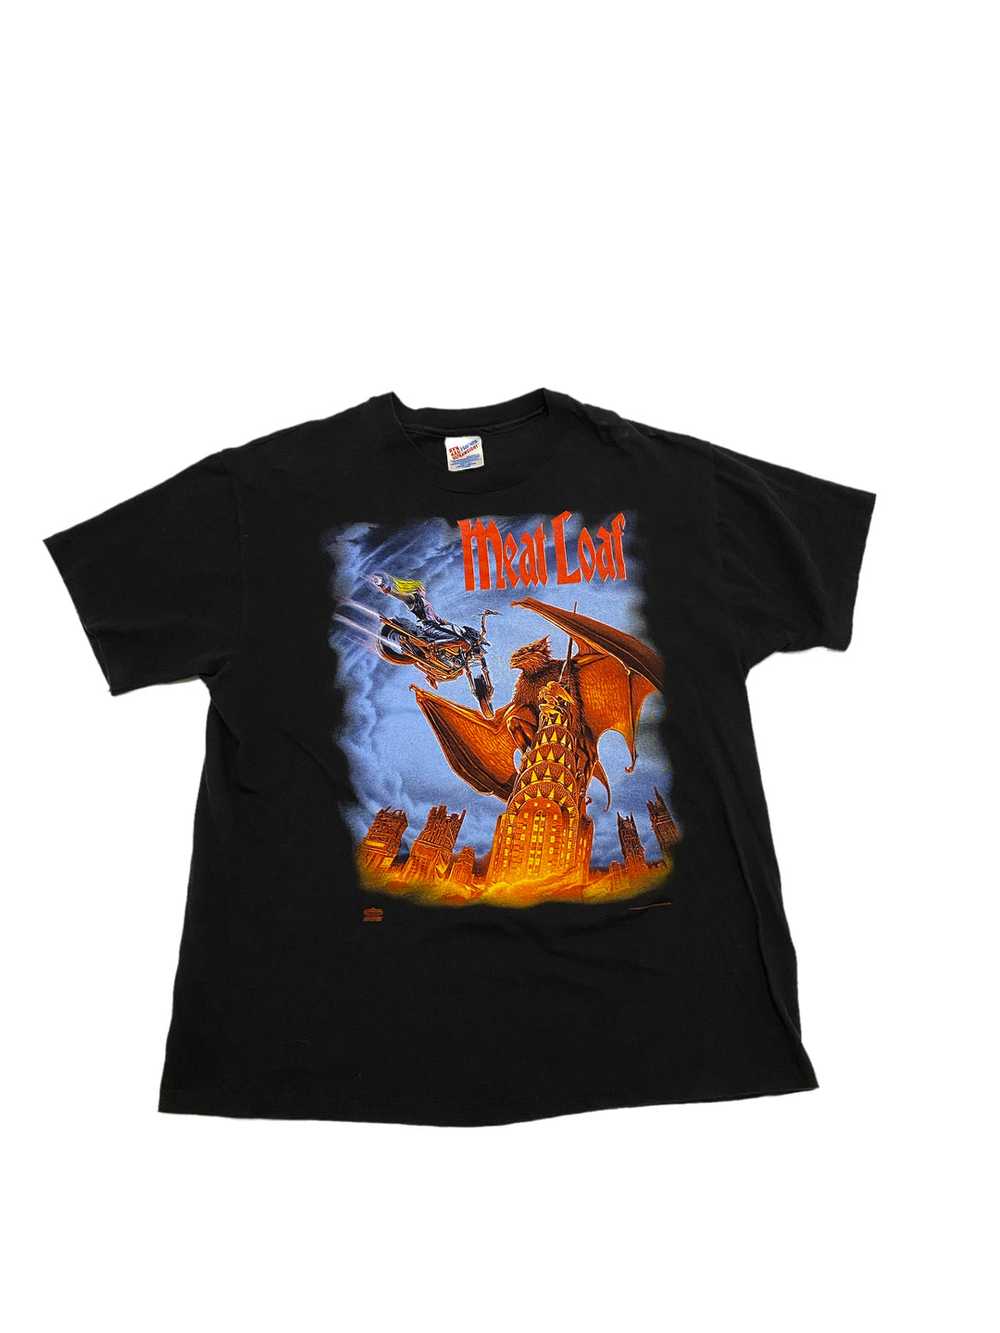 ‘93-‘95 Meatloaf Tour Tee - image 1